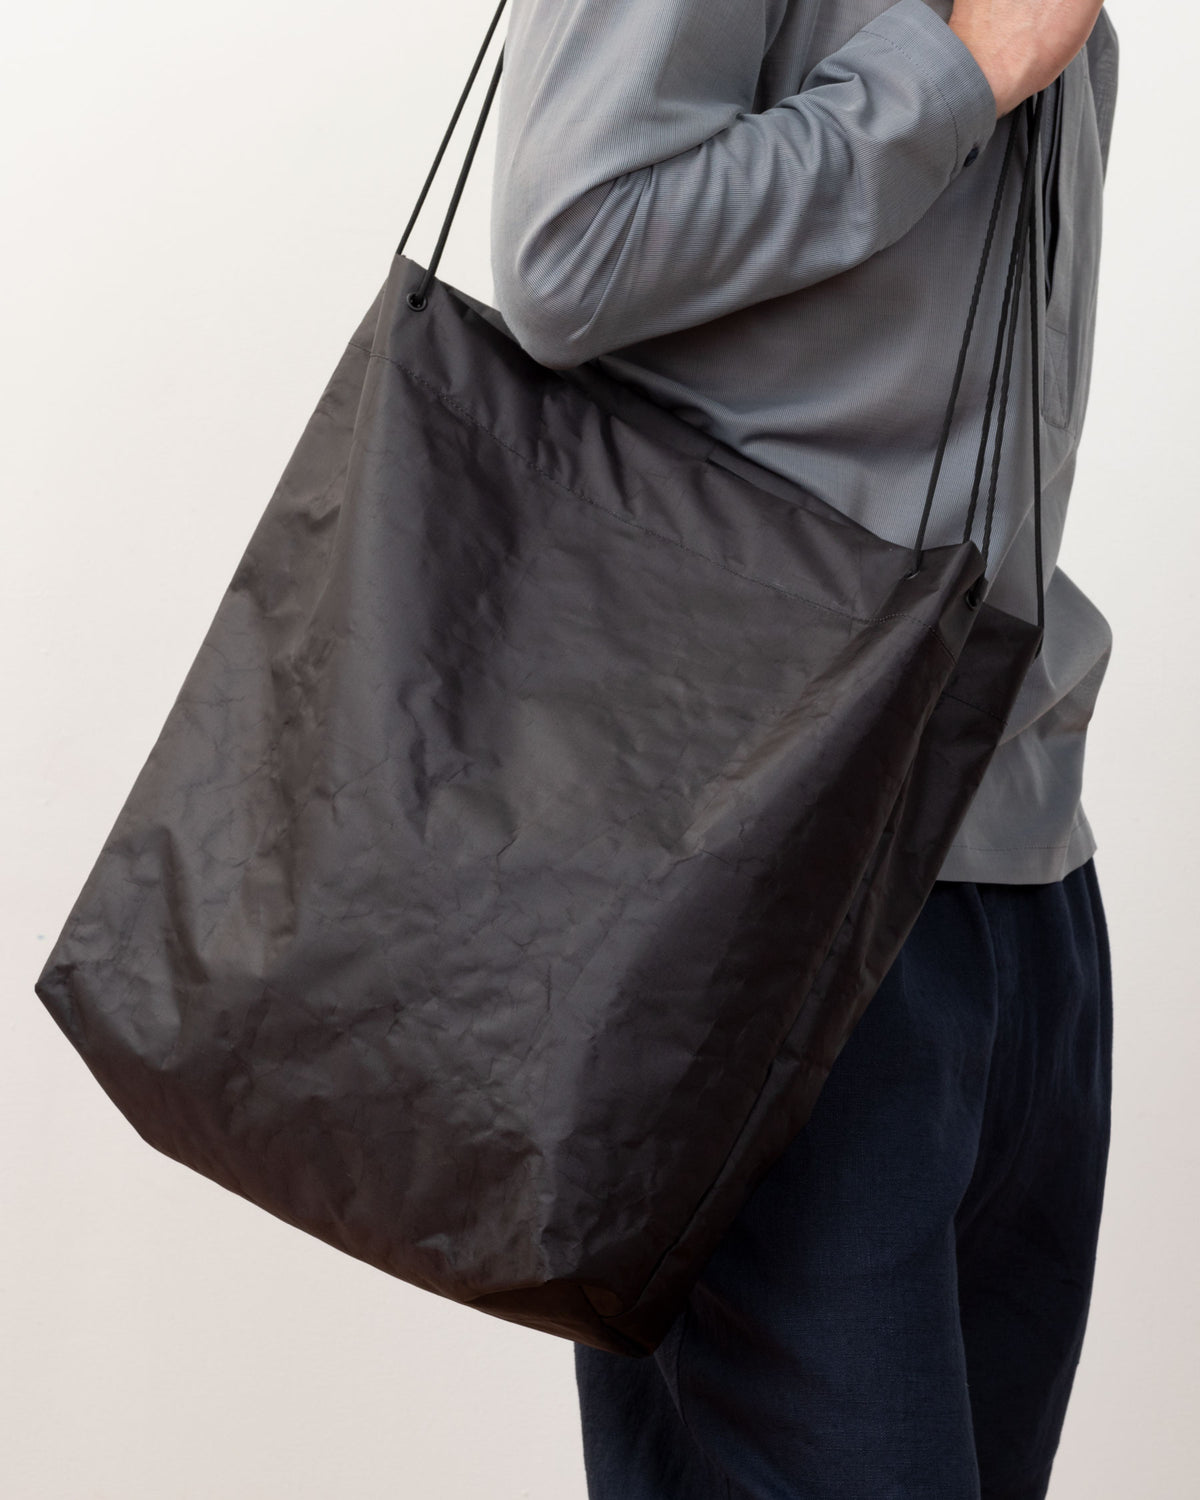 Outlier - Experiment 261 - Nexhigh Suspension Tote – OUTLIER